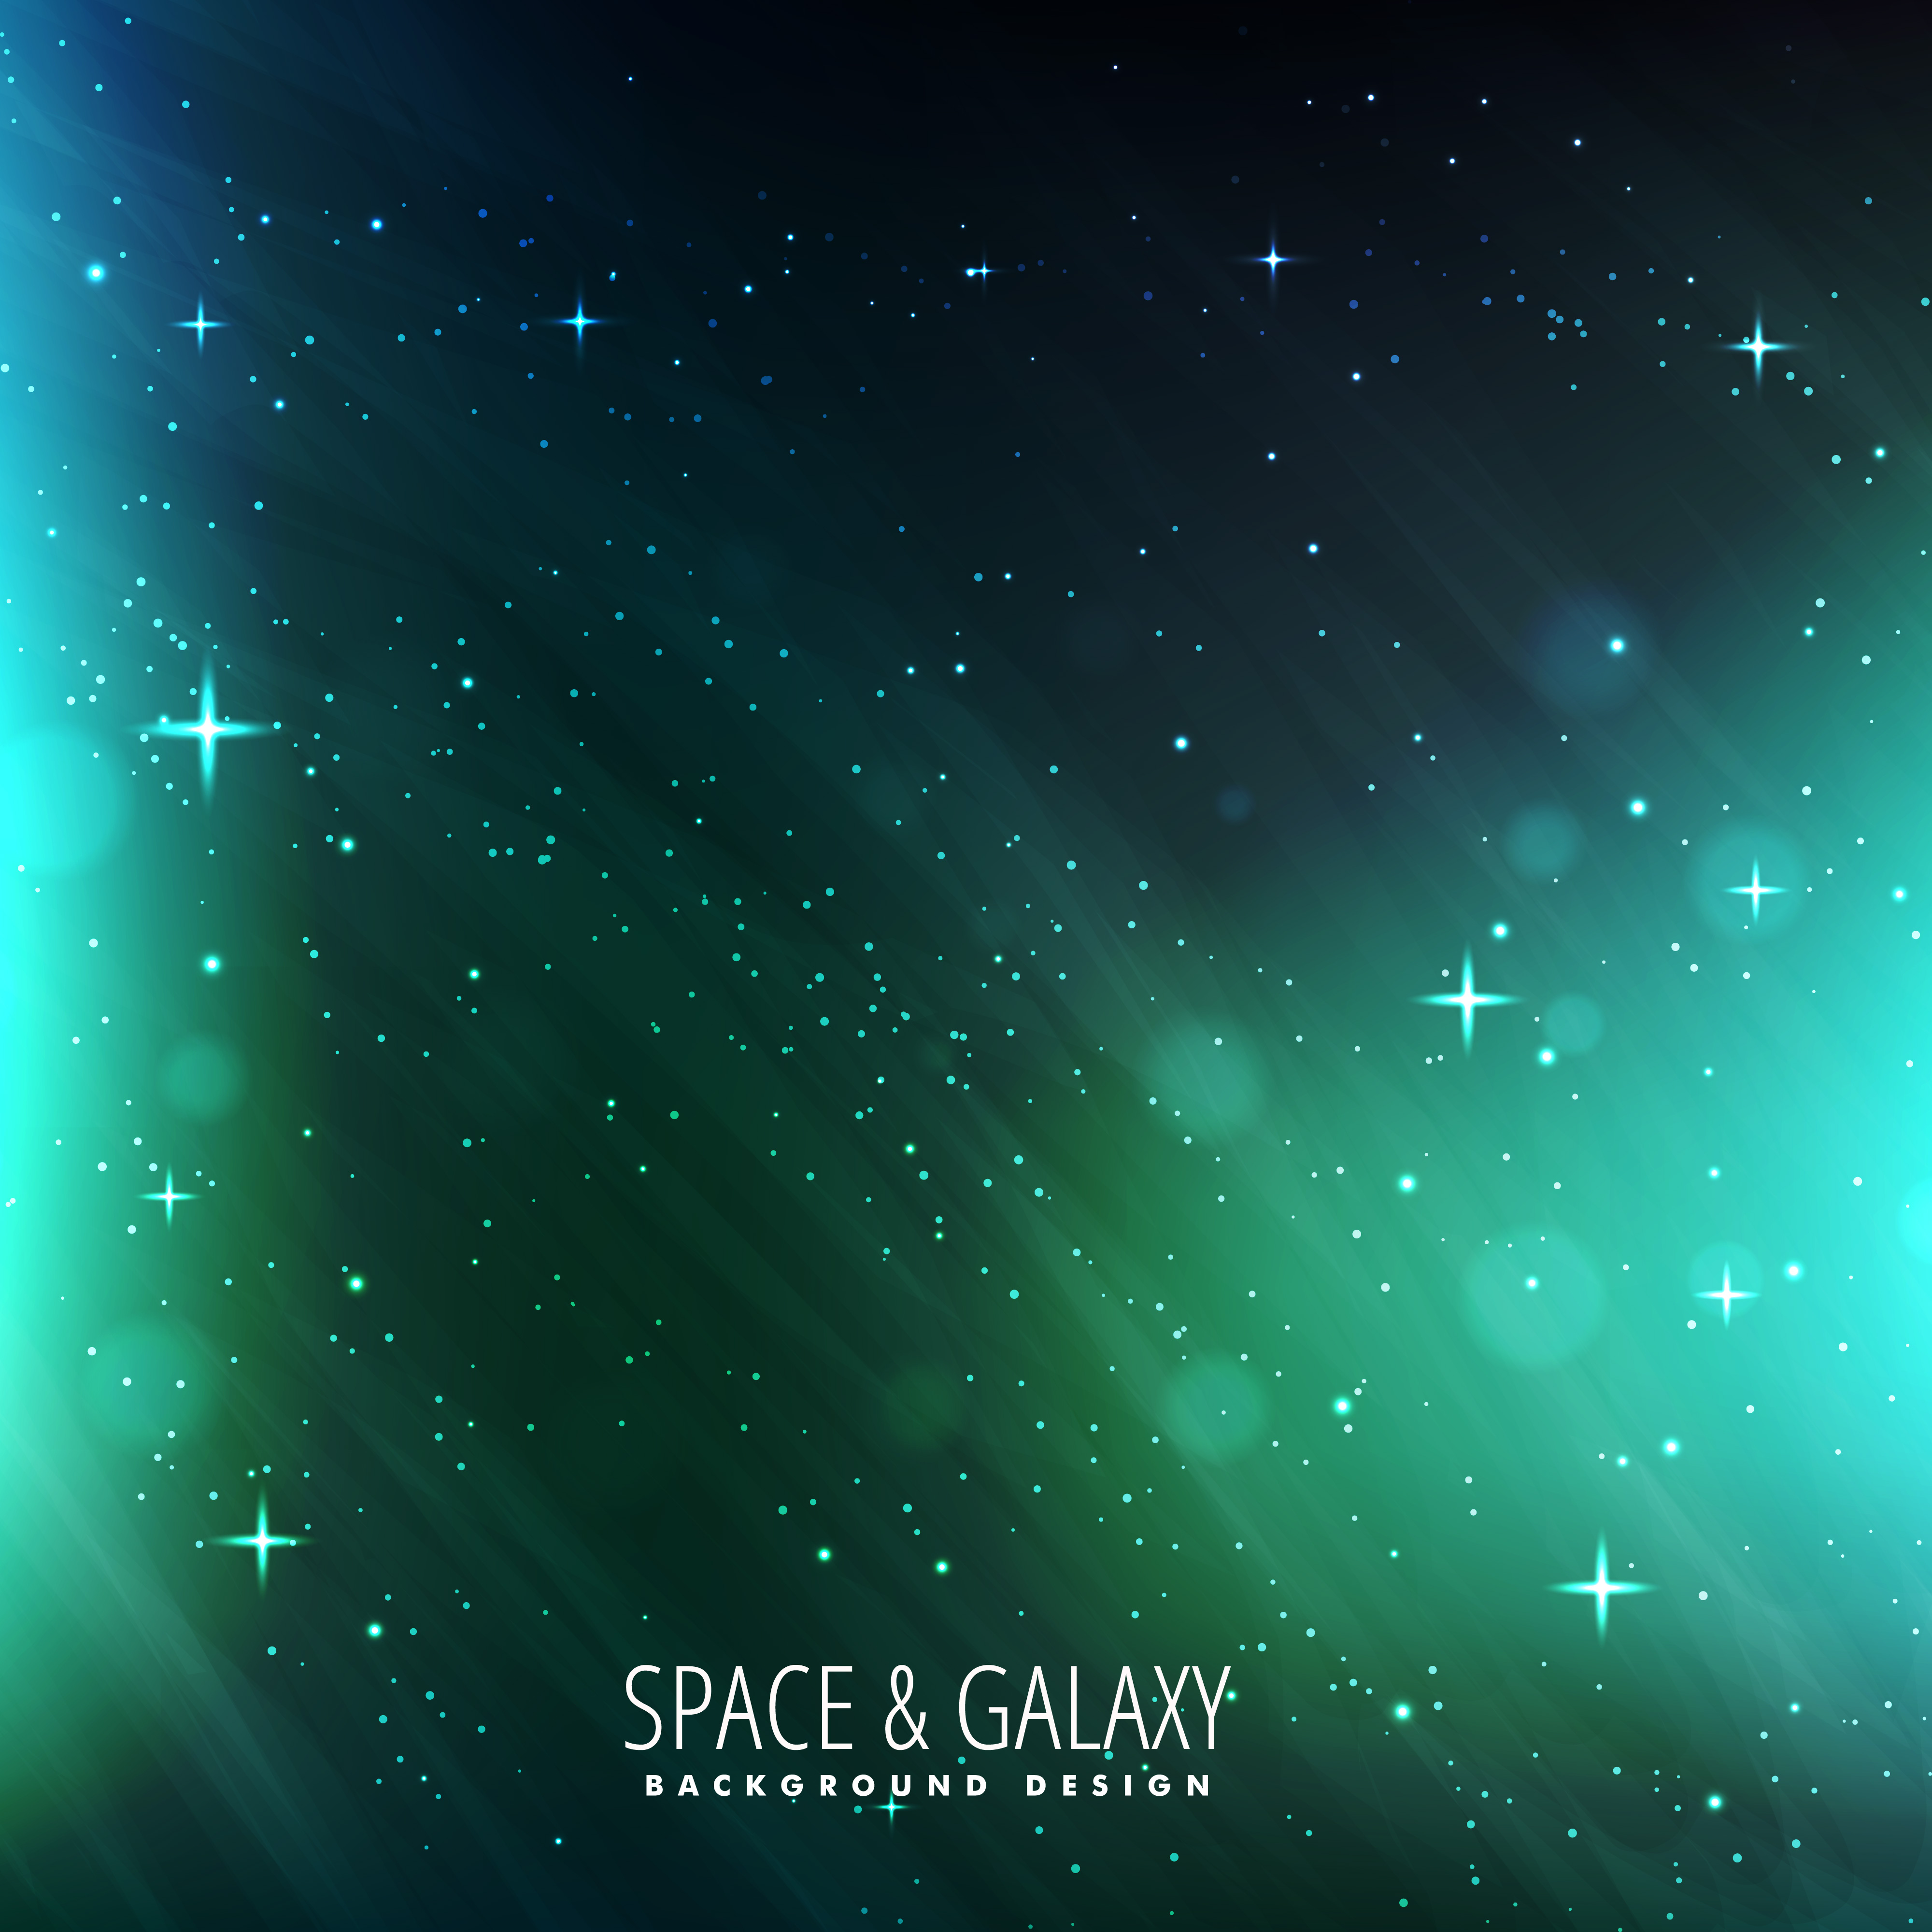 universe space background - Download Free Vector Art, Stock Graphics